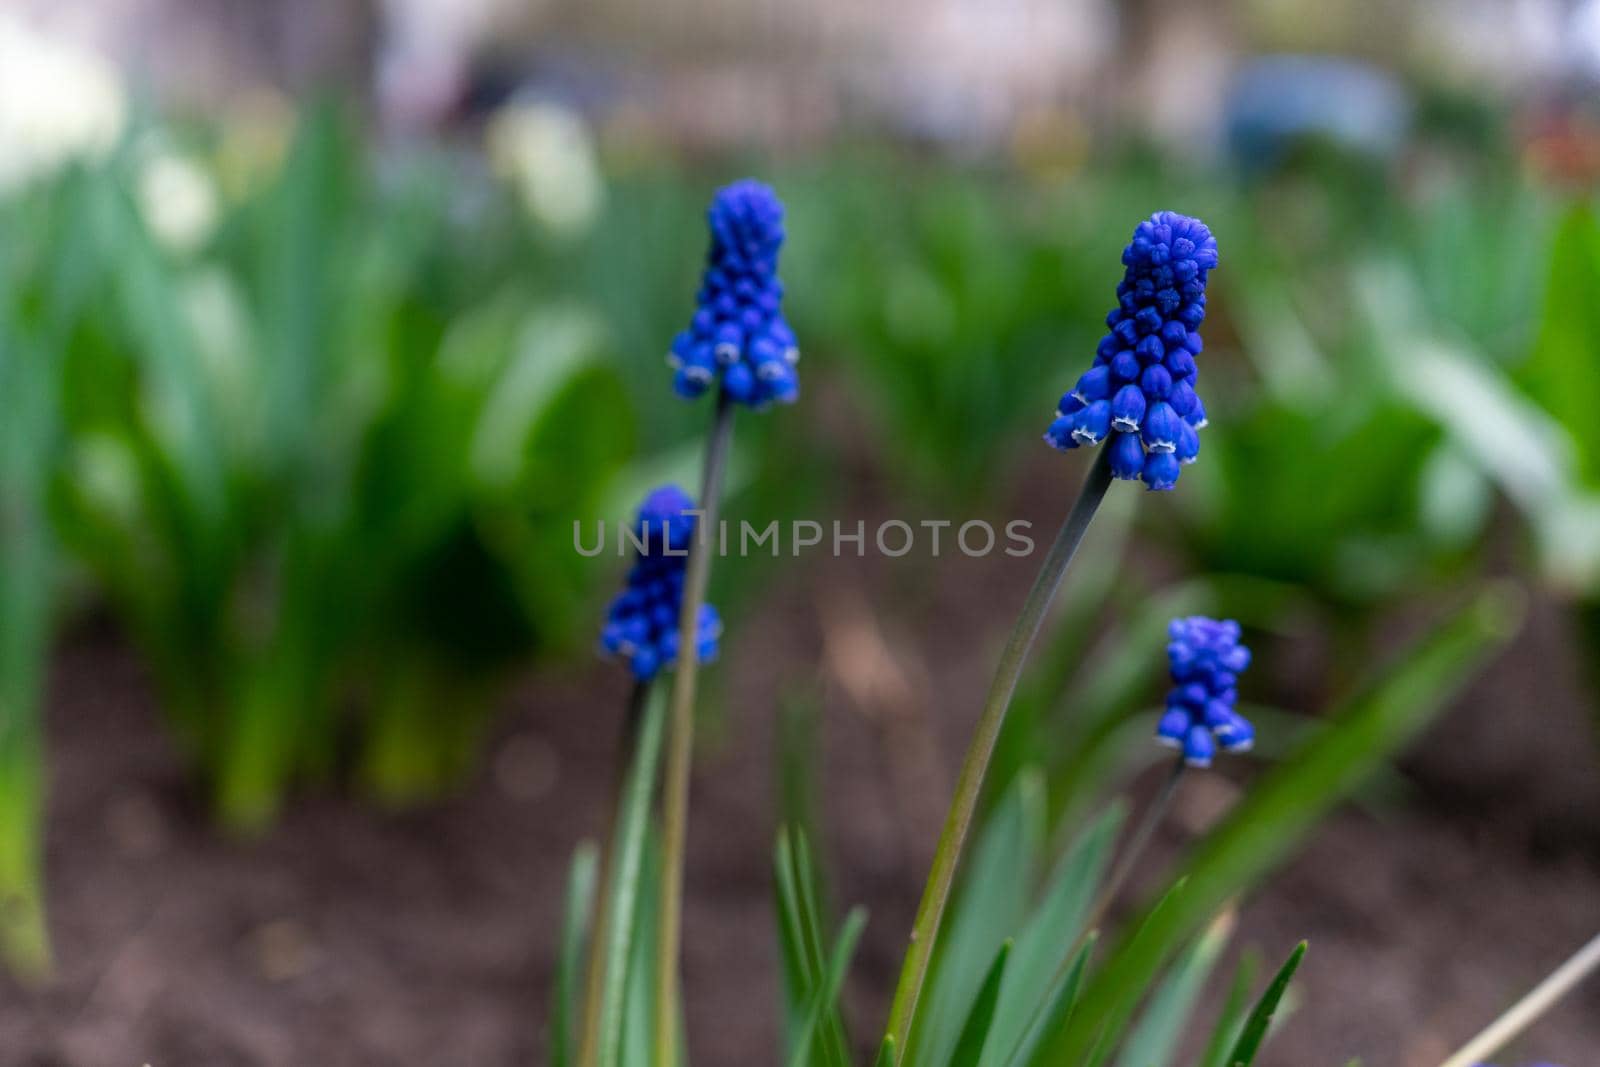 Grape hyacinth photographed close up on a flowerbed by Serhii_Voroshchuk